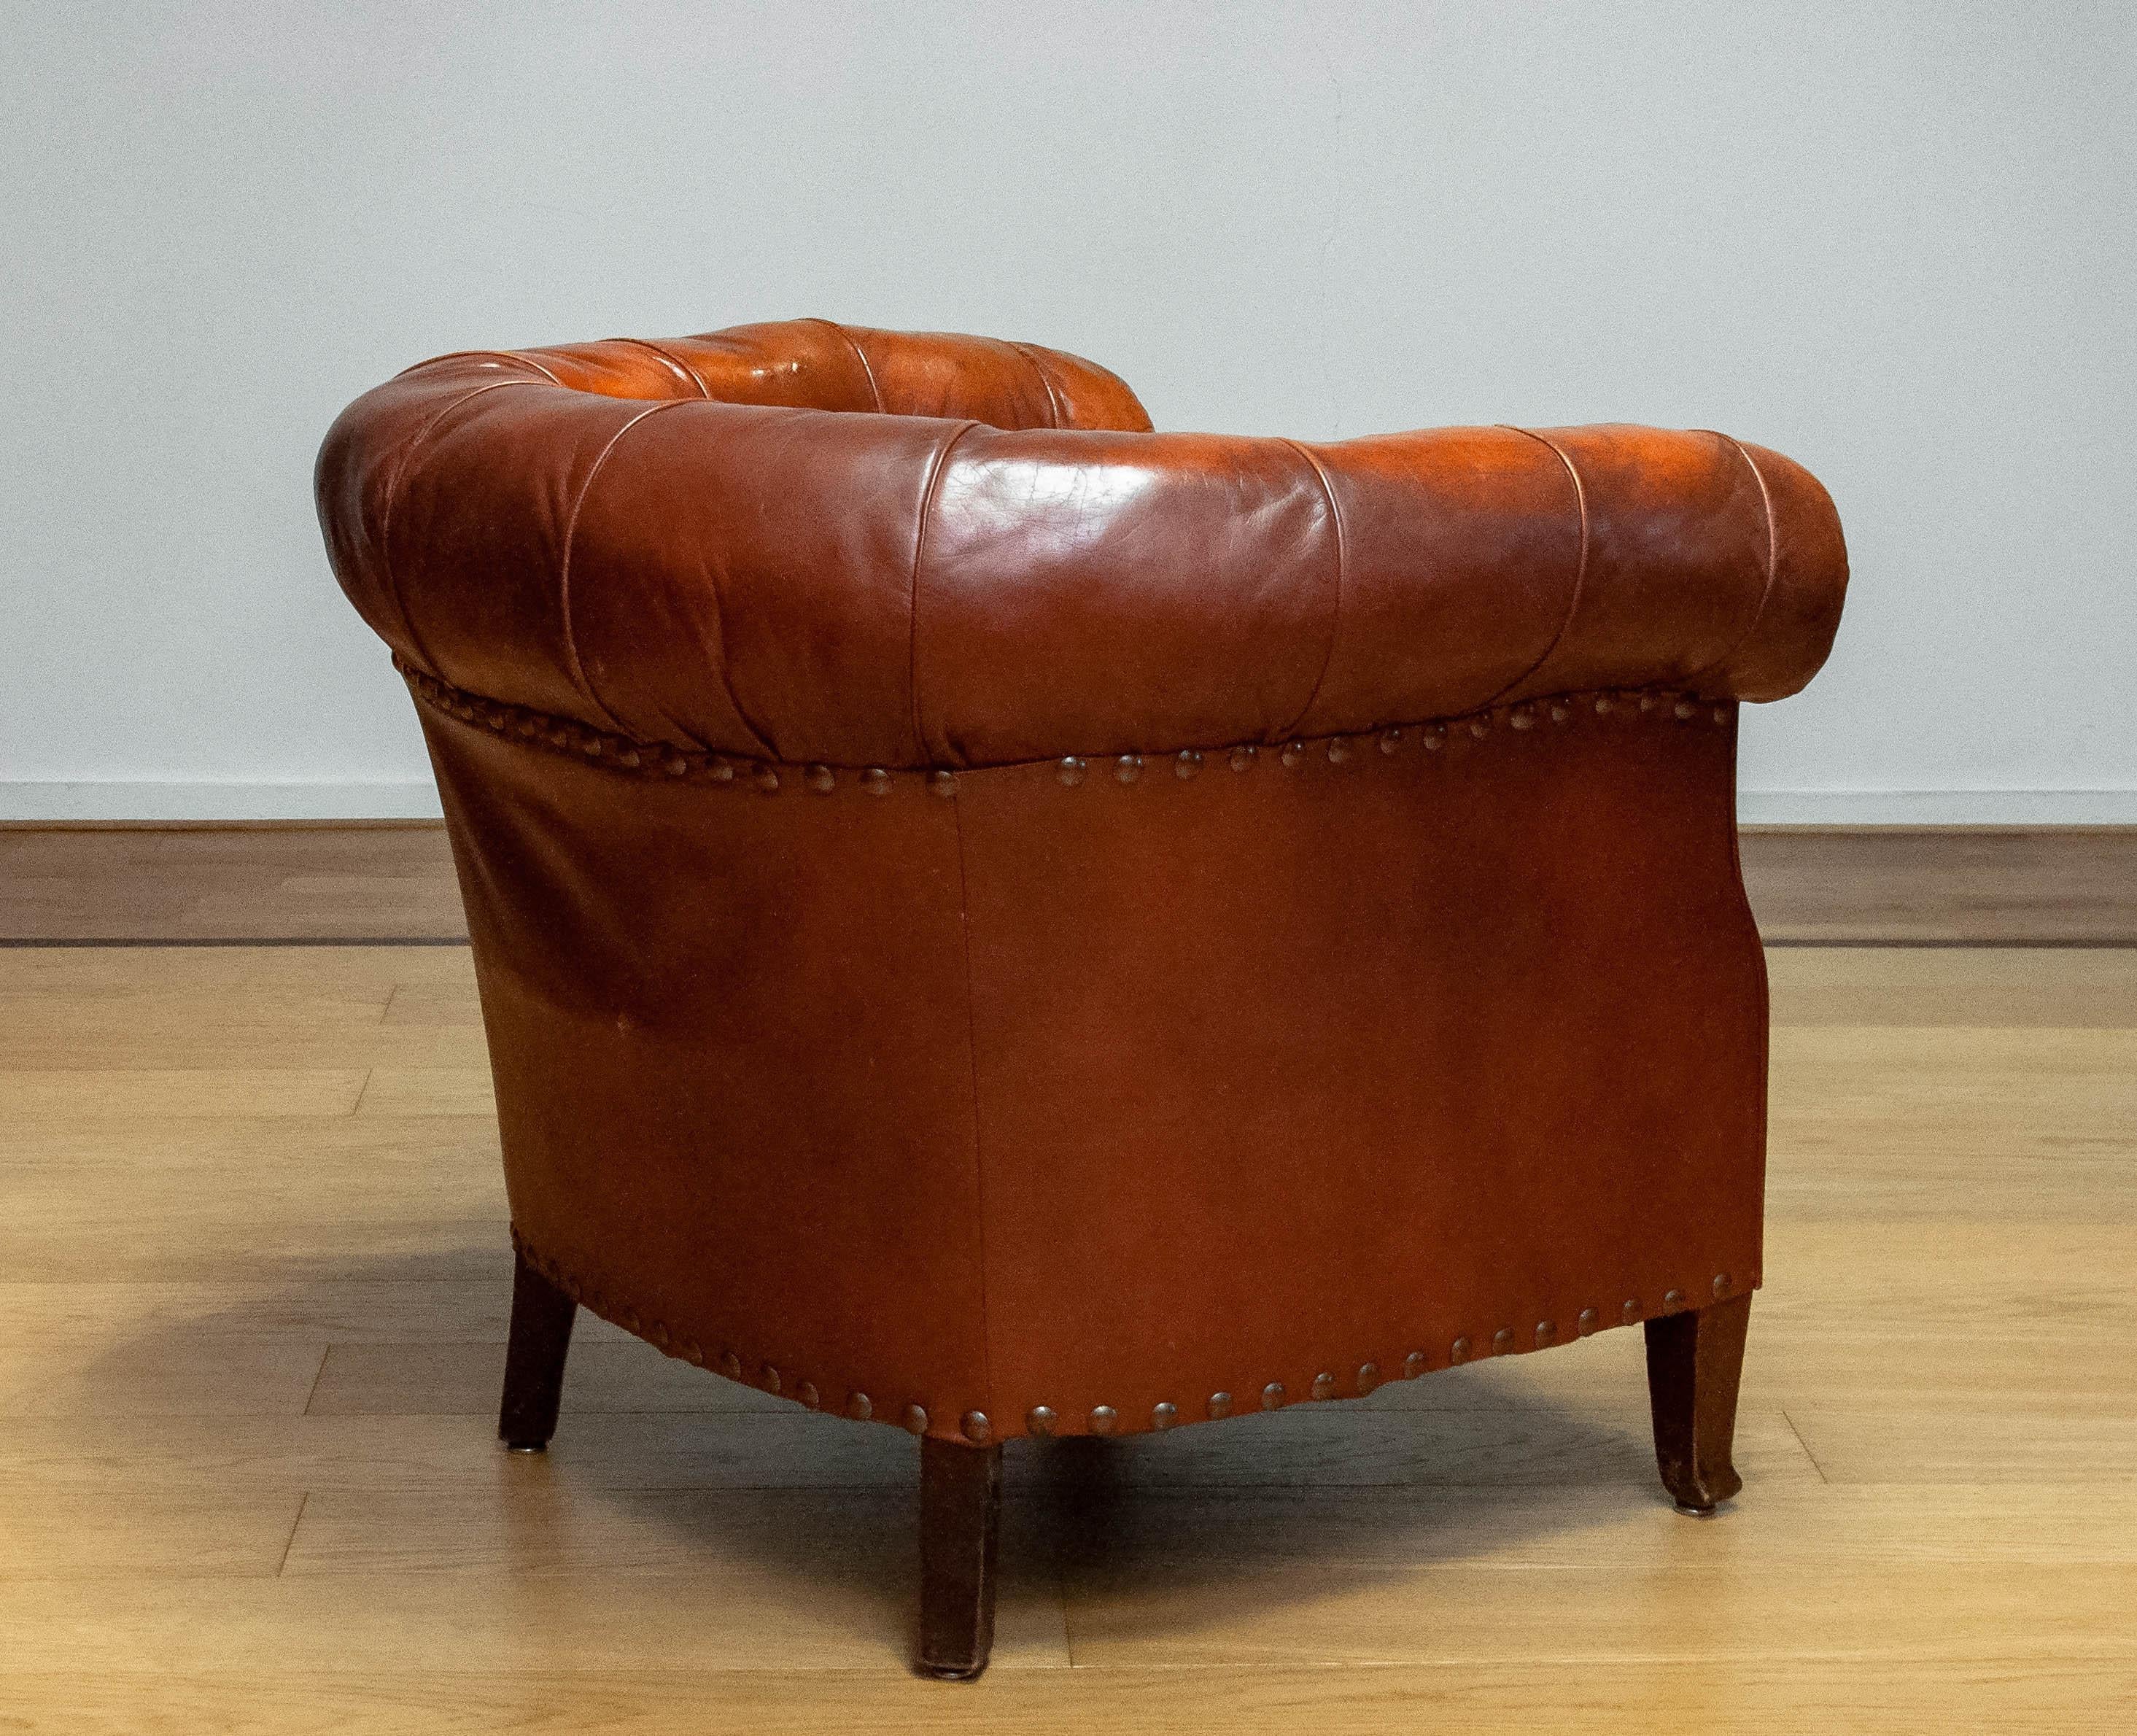 1940s Swedish Tufted Club Chair 'Chesterfield Model' In Tan Brown Worn Leather 4